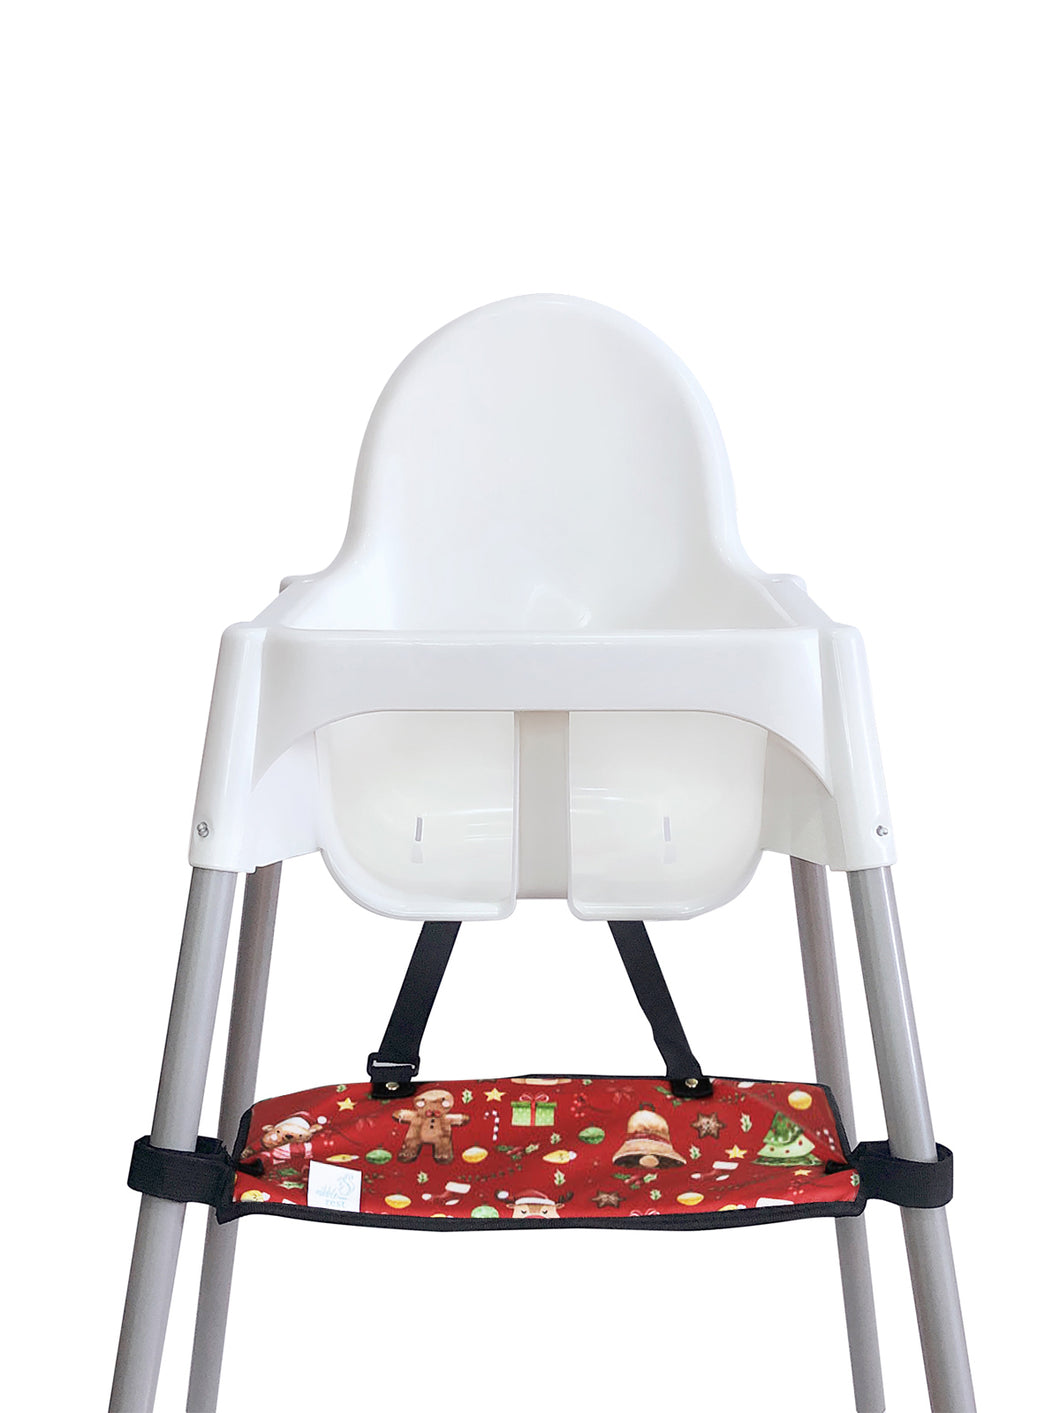 Footrest for the IKEA High Chair, Dishwasher Safe Footrest, Adjustable Foot  Rest for Antilop Highchair, Support Clamps Included 